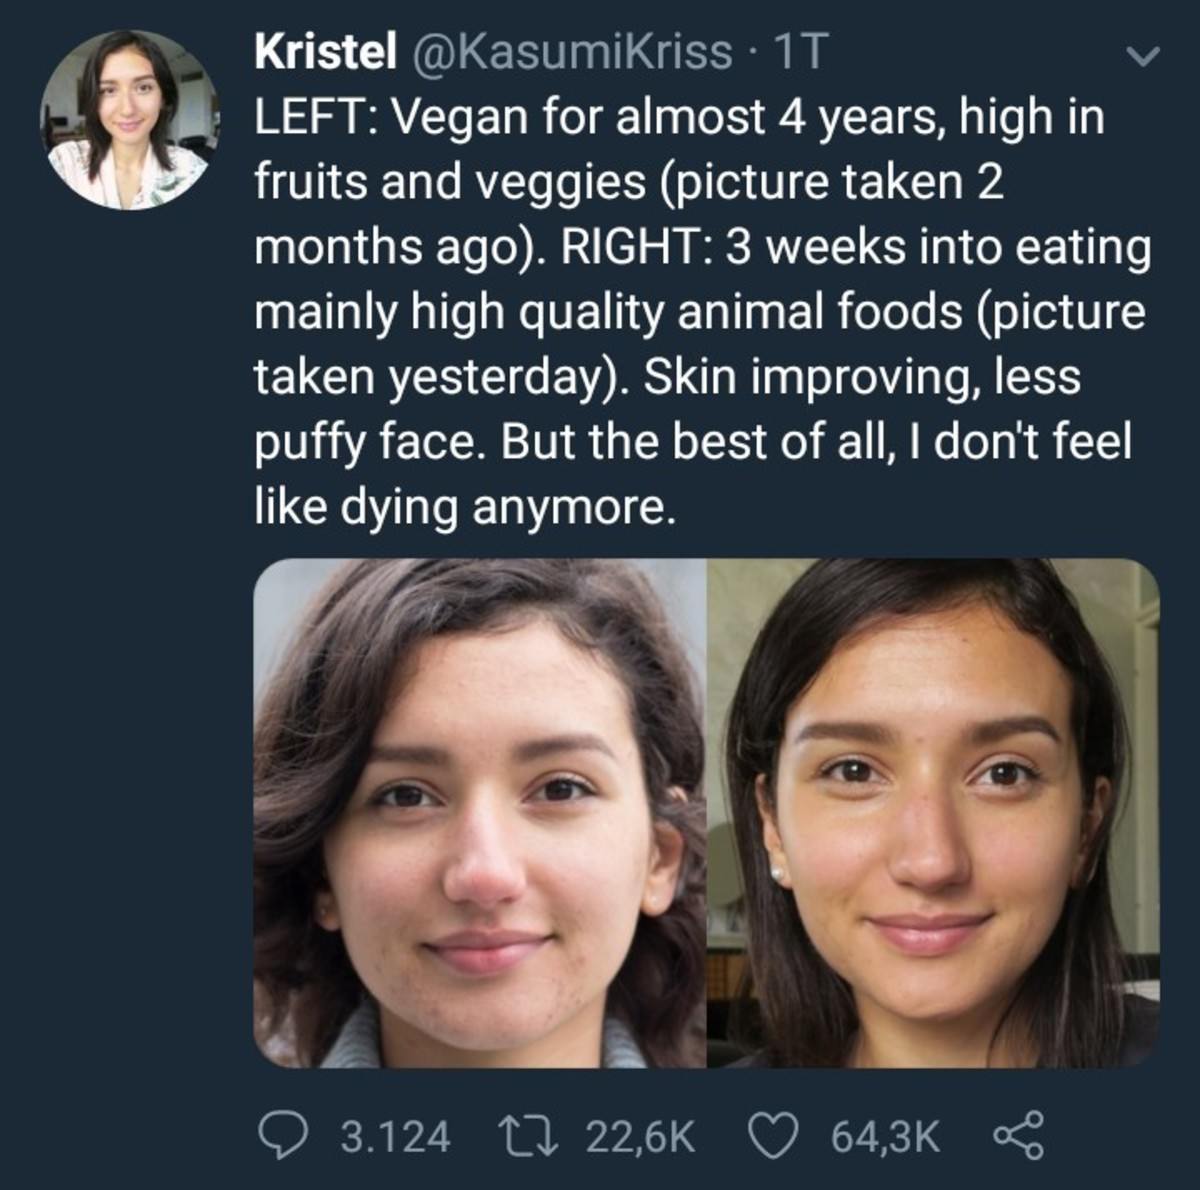 memes - vegan vs non vegan face - Kristel 17 Left Vegan for almost 4 years, high in fruits and veggies picture taken 2 months ago. Right 3 weeks into eating mainly high quality animal foods picture taken yesterday. Skin improving, less puffy face. But the